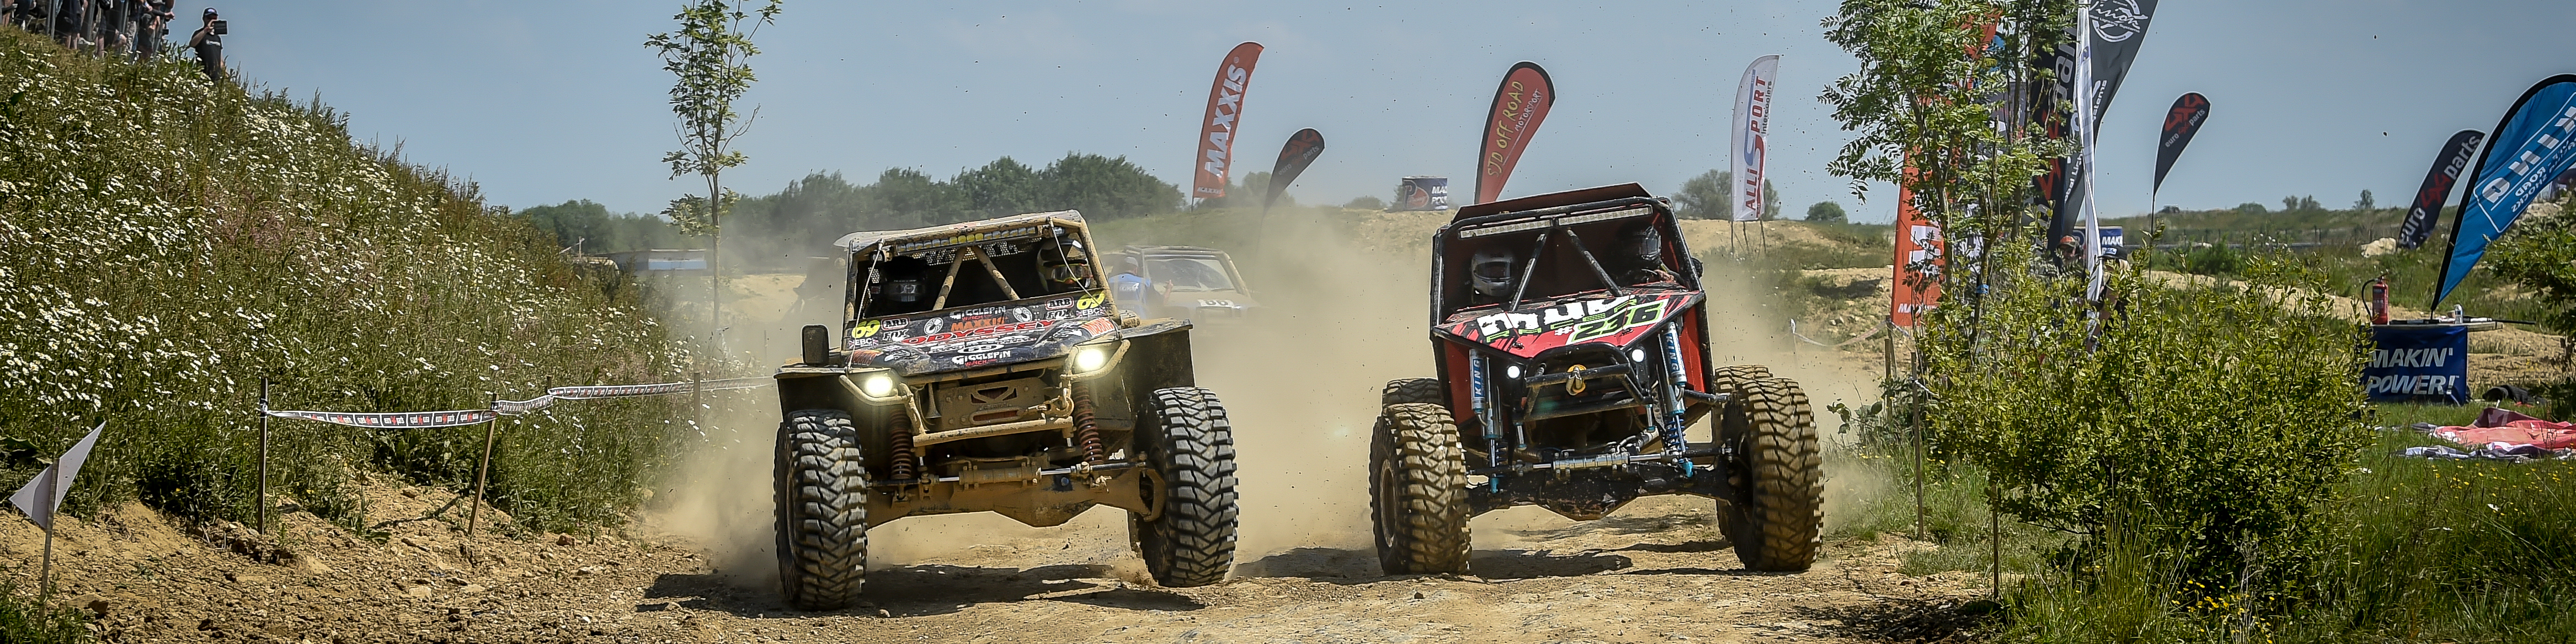 The Maxxis Ultra4 Series kicks off in Italy